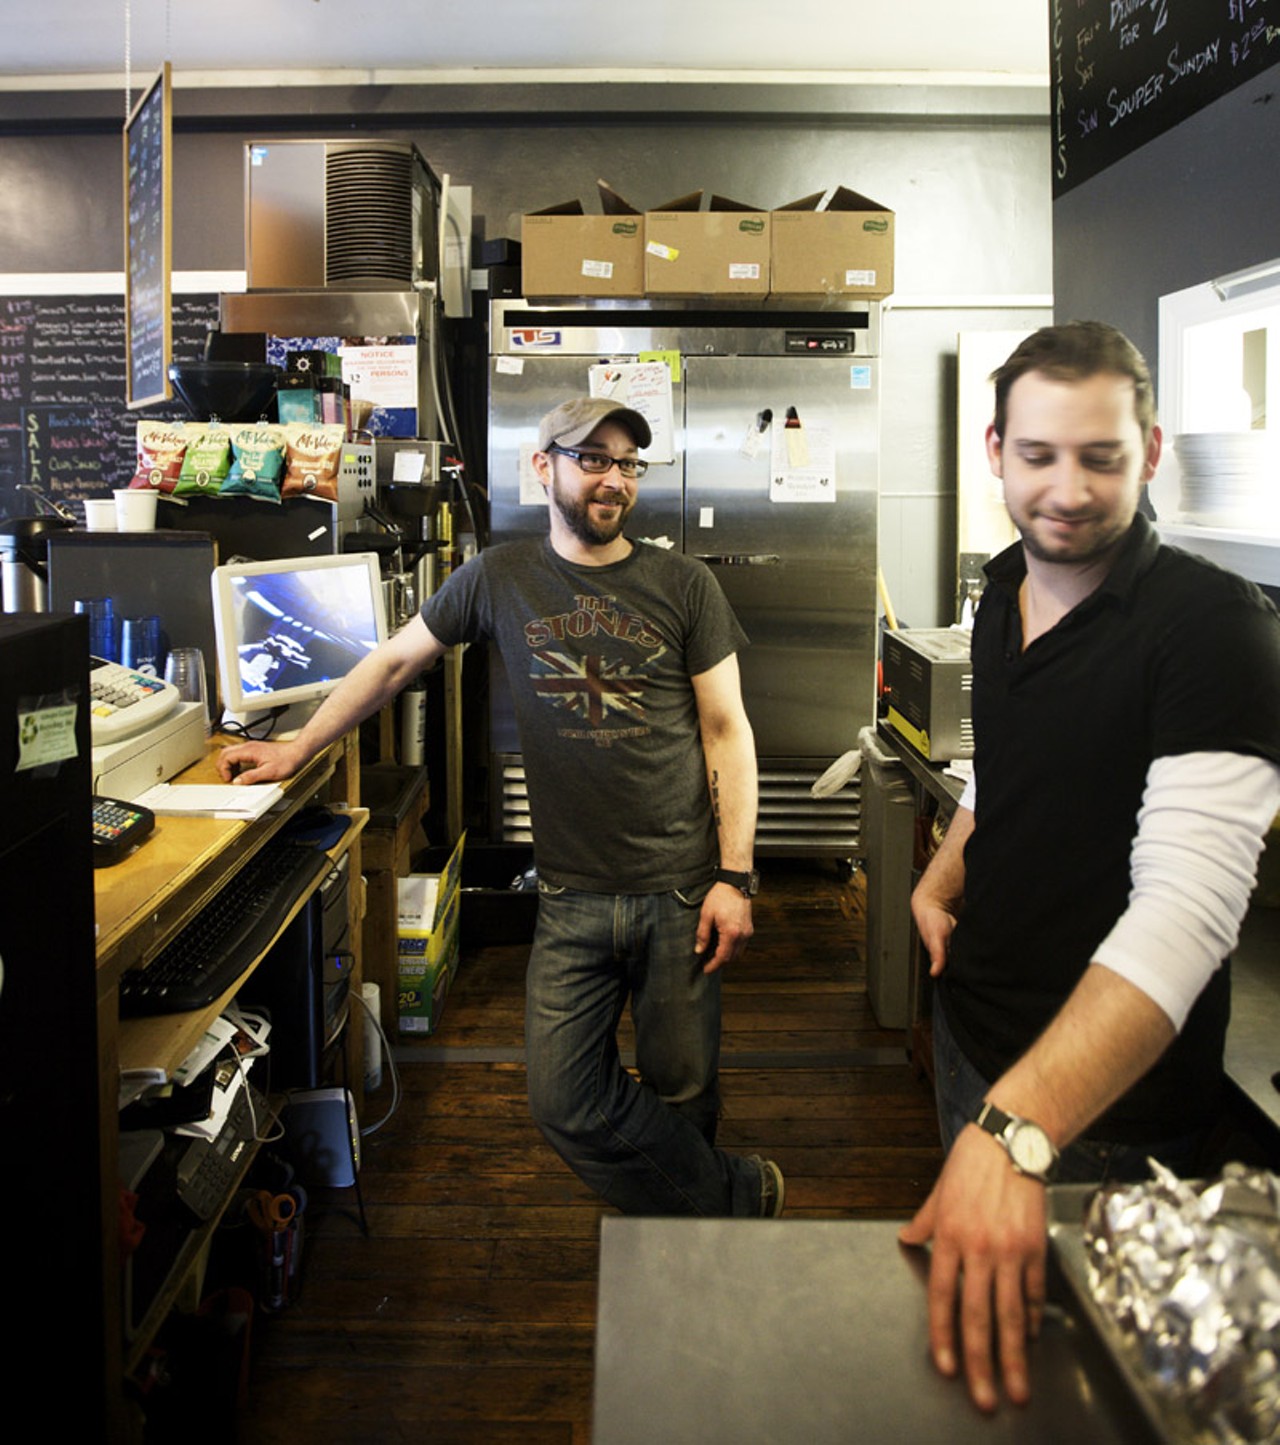 Nora's employees, on left, Mike Clauser and on right, Brandon Cullum.